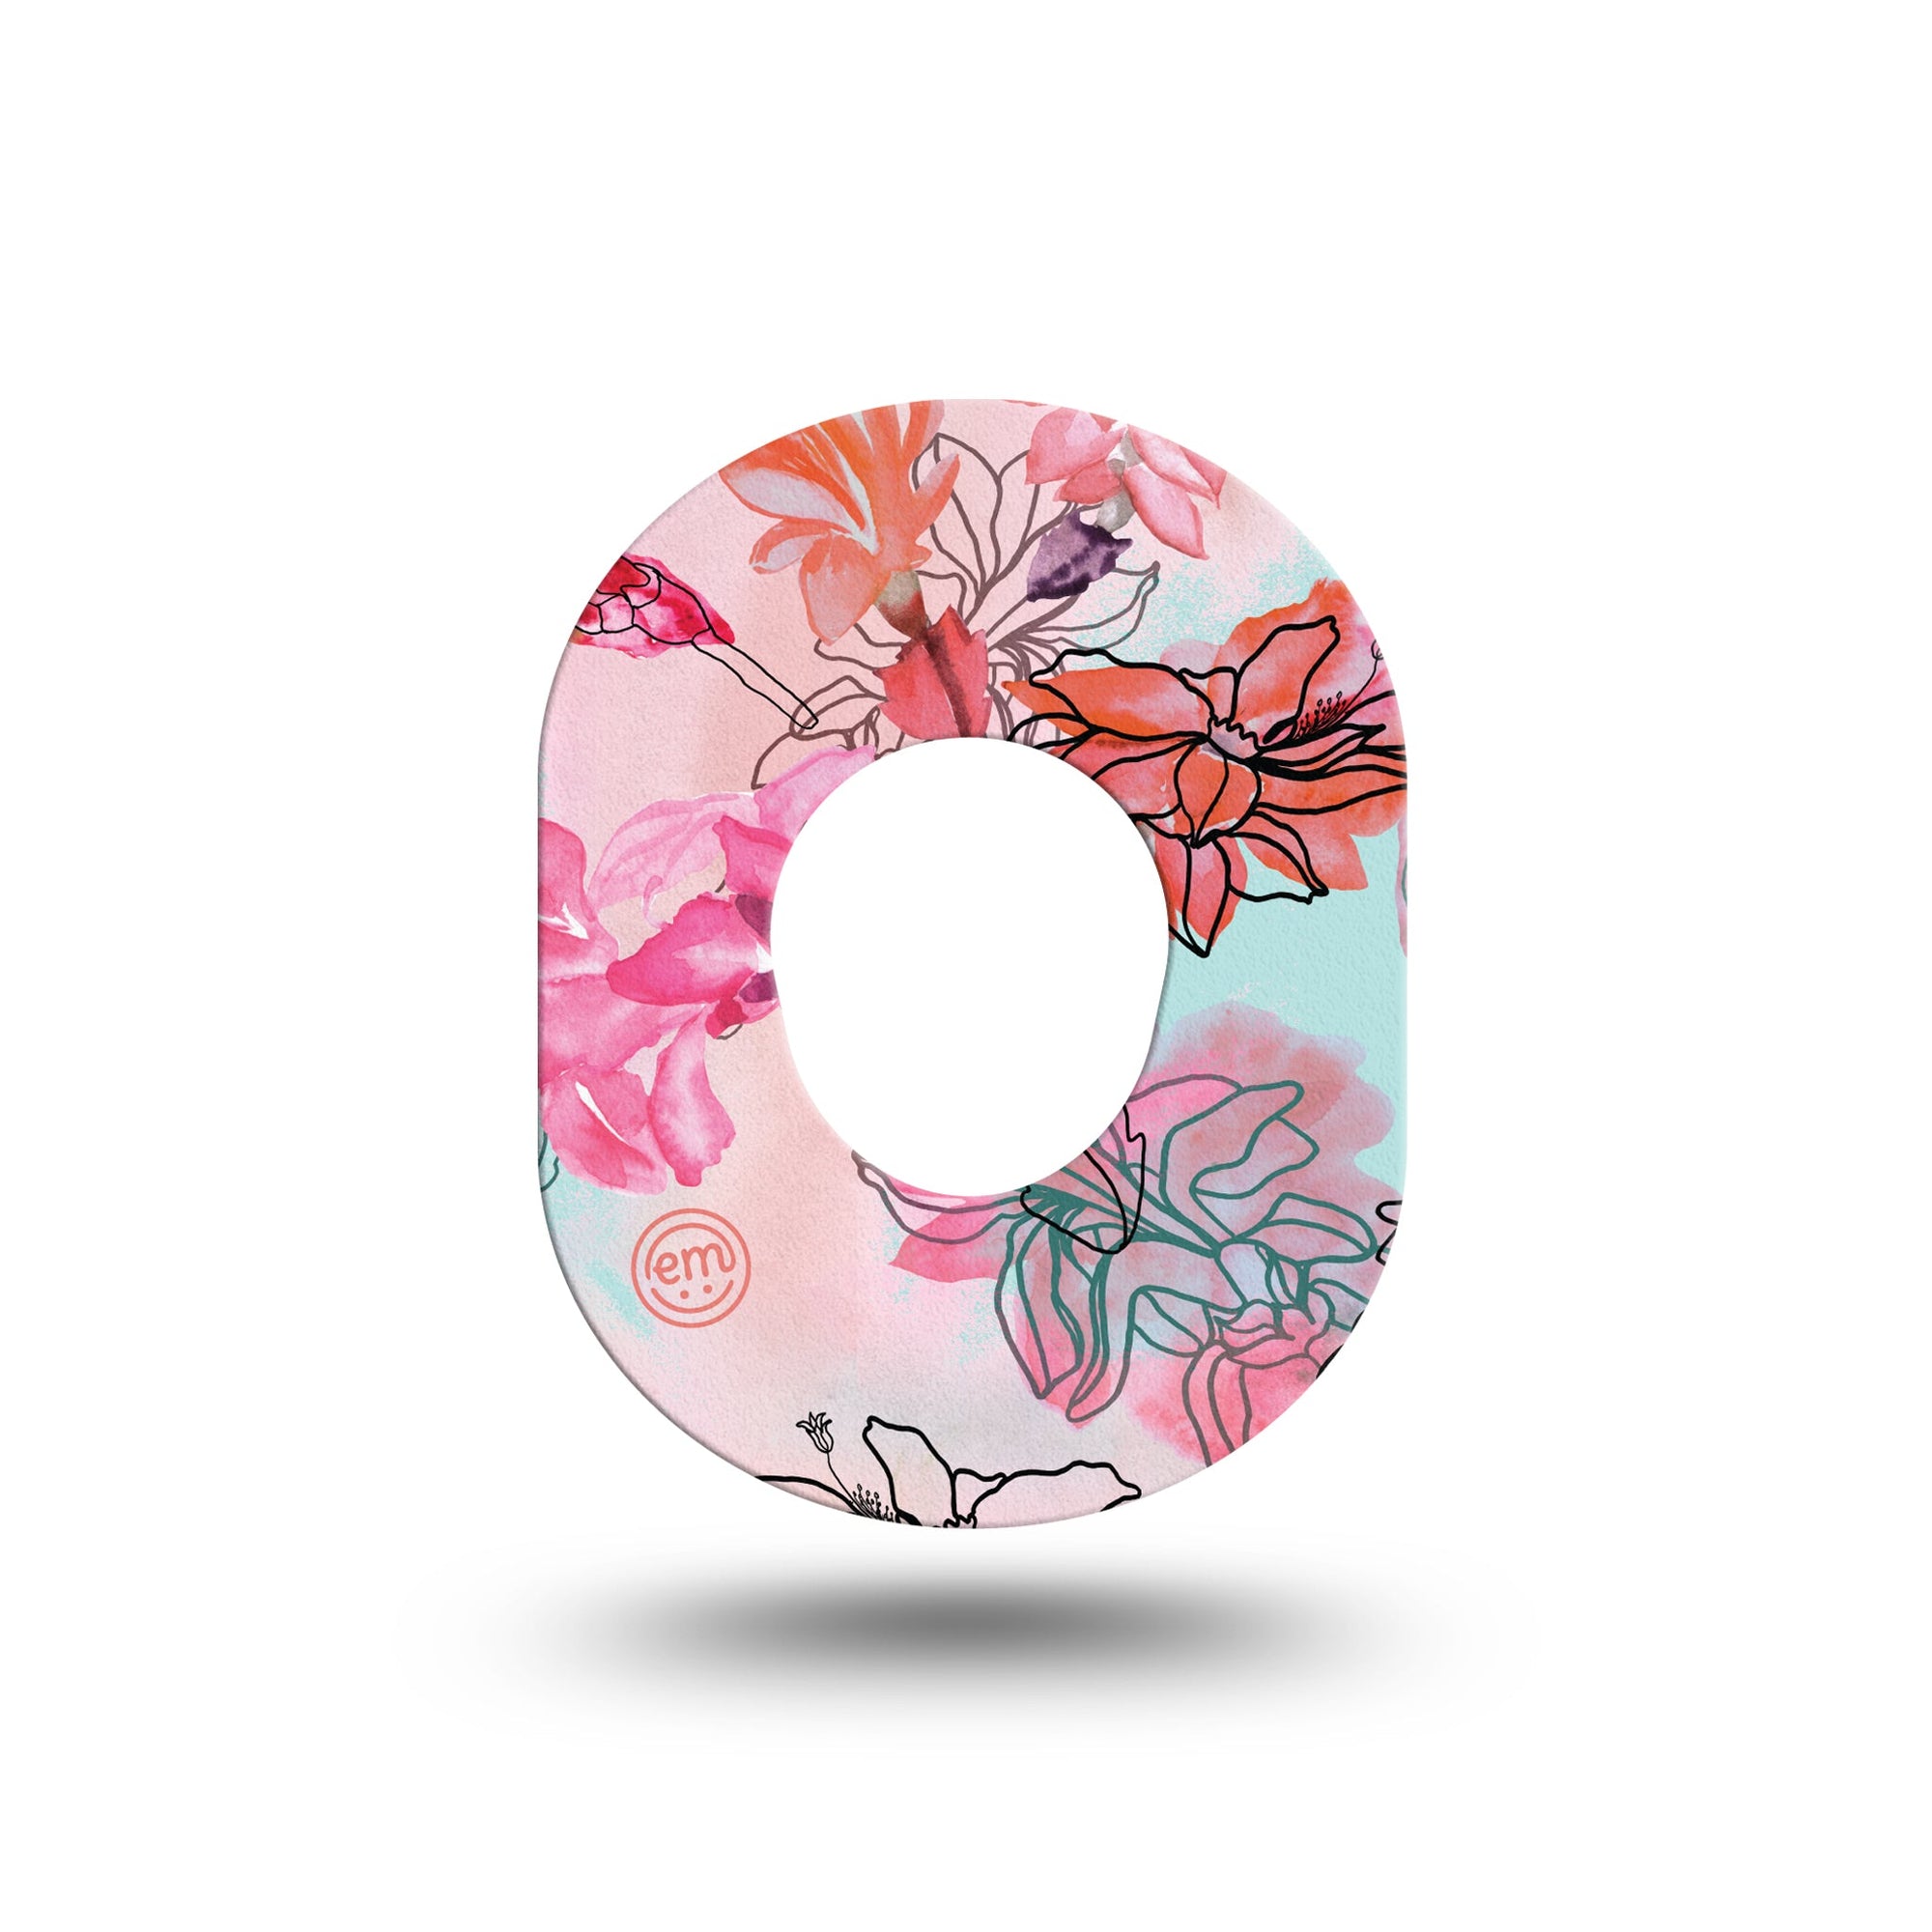 ExpressionMed, Whimsical Blossoms Dexcom G7 Mini Tape, Single, pink and blue flowers design